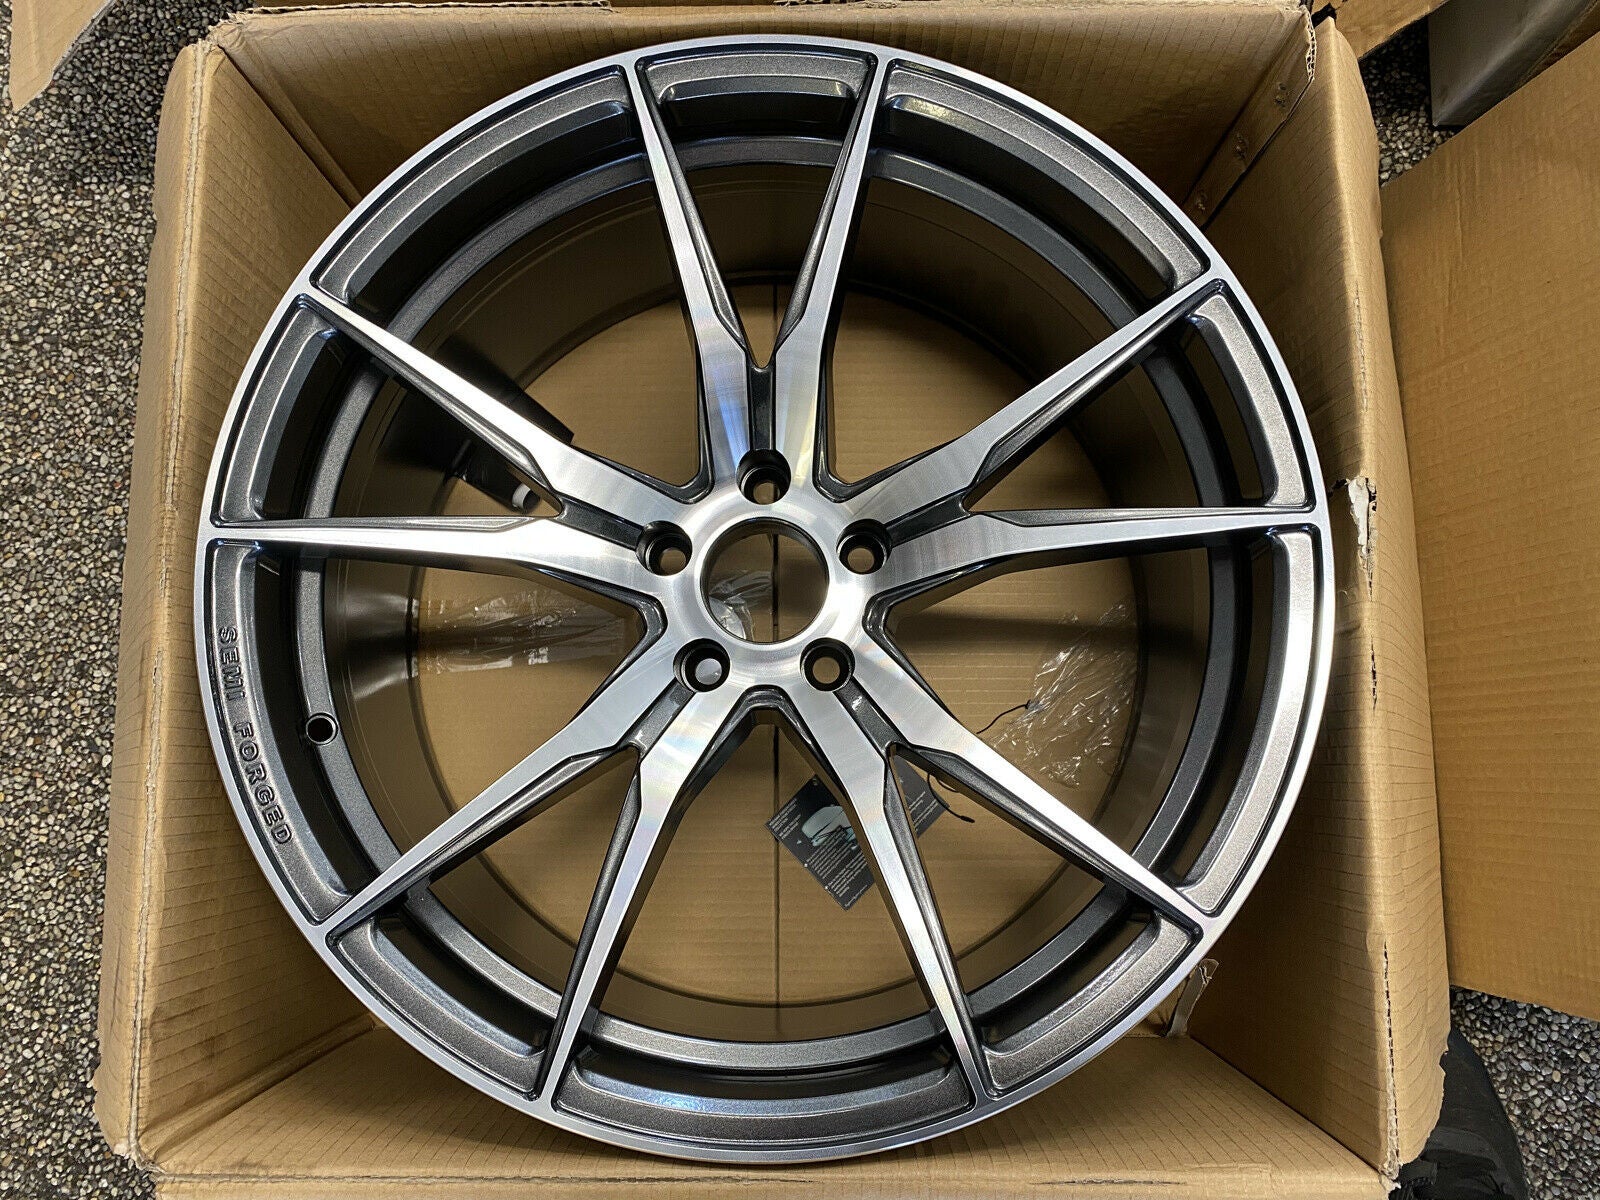 Ny 20” Concave Alufælge